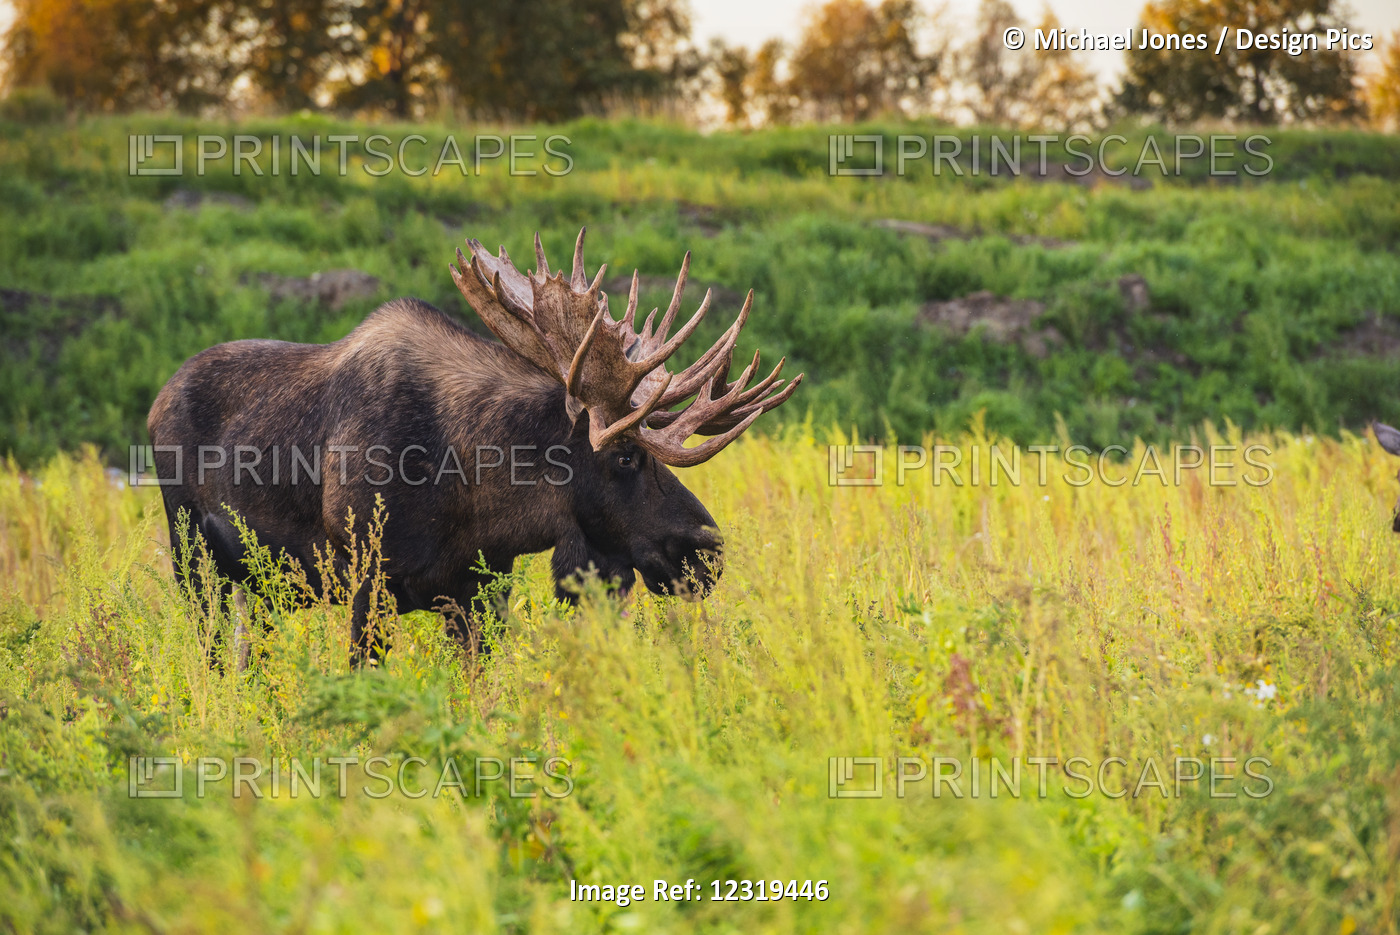 The Large Bull Moose Known As "hook" Who Roams In The Kincade Park Area Is Seen ...